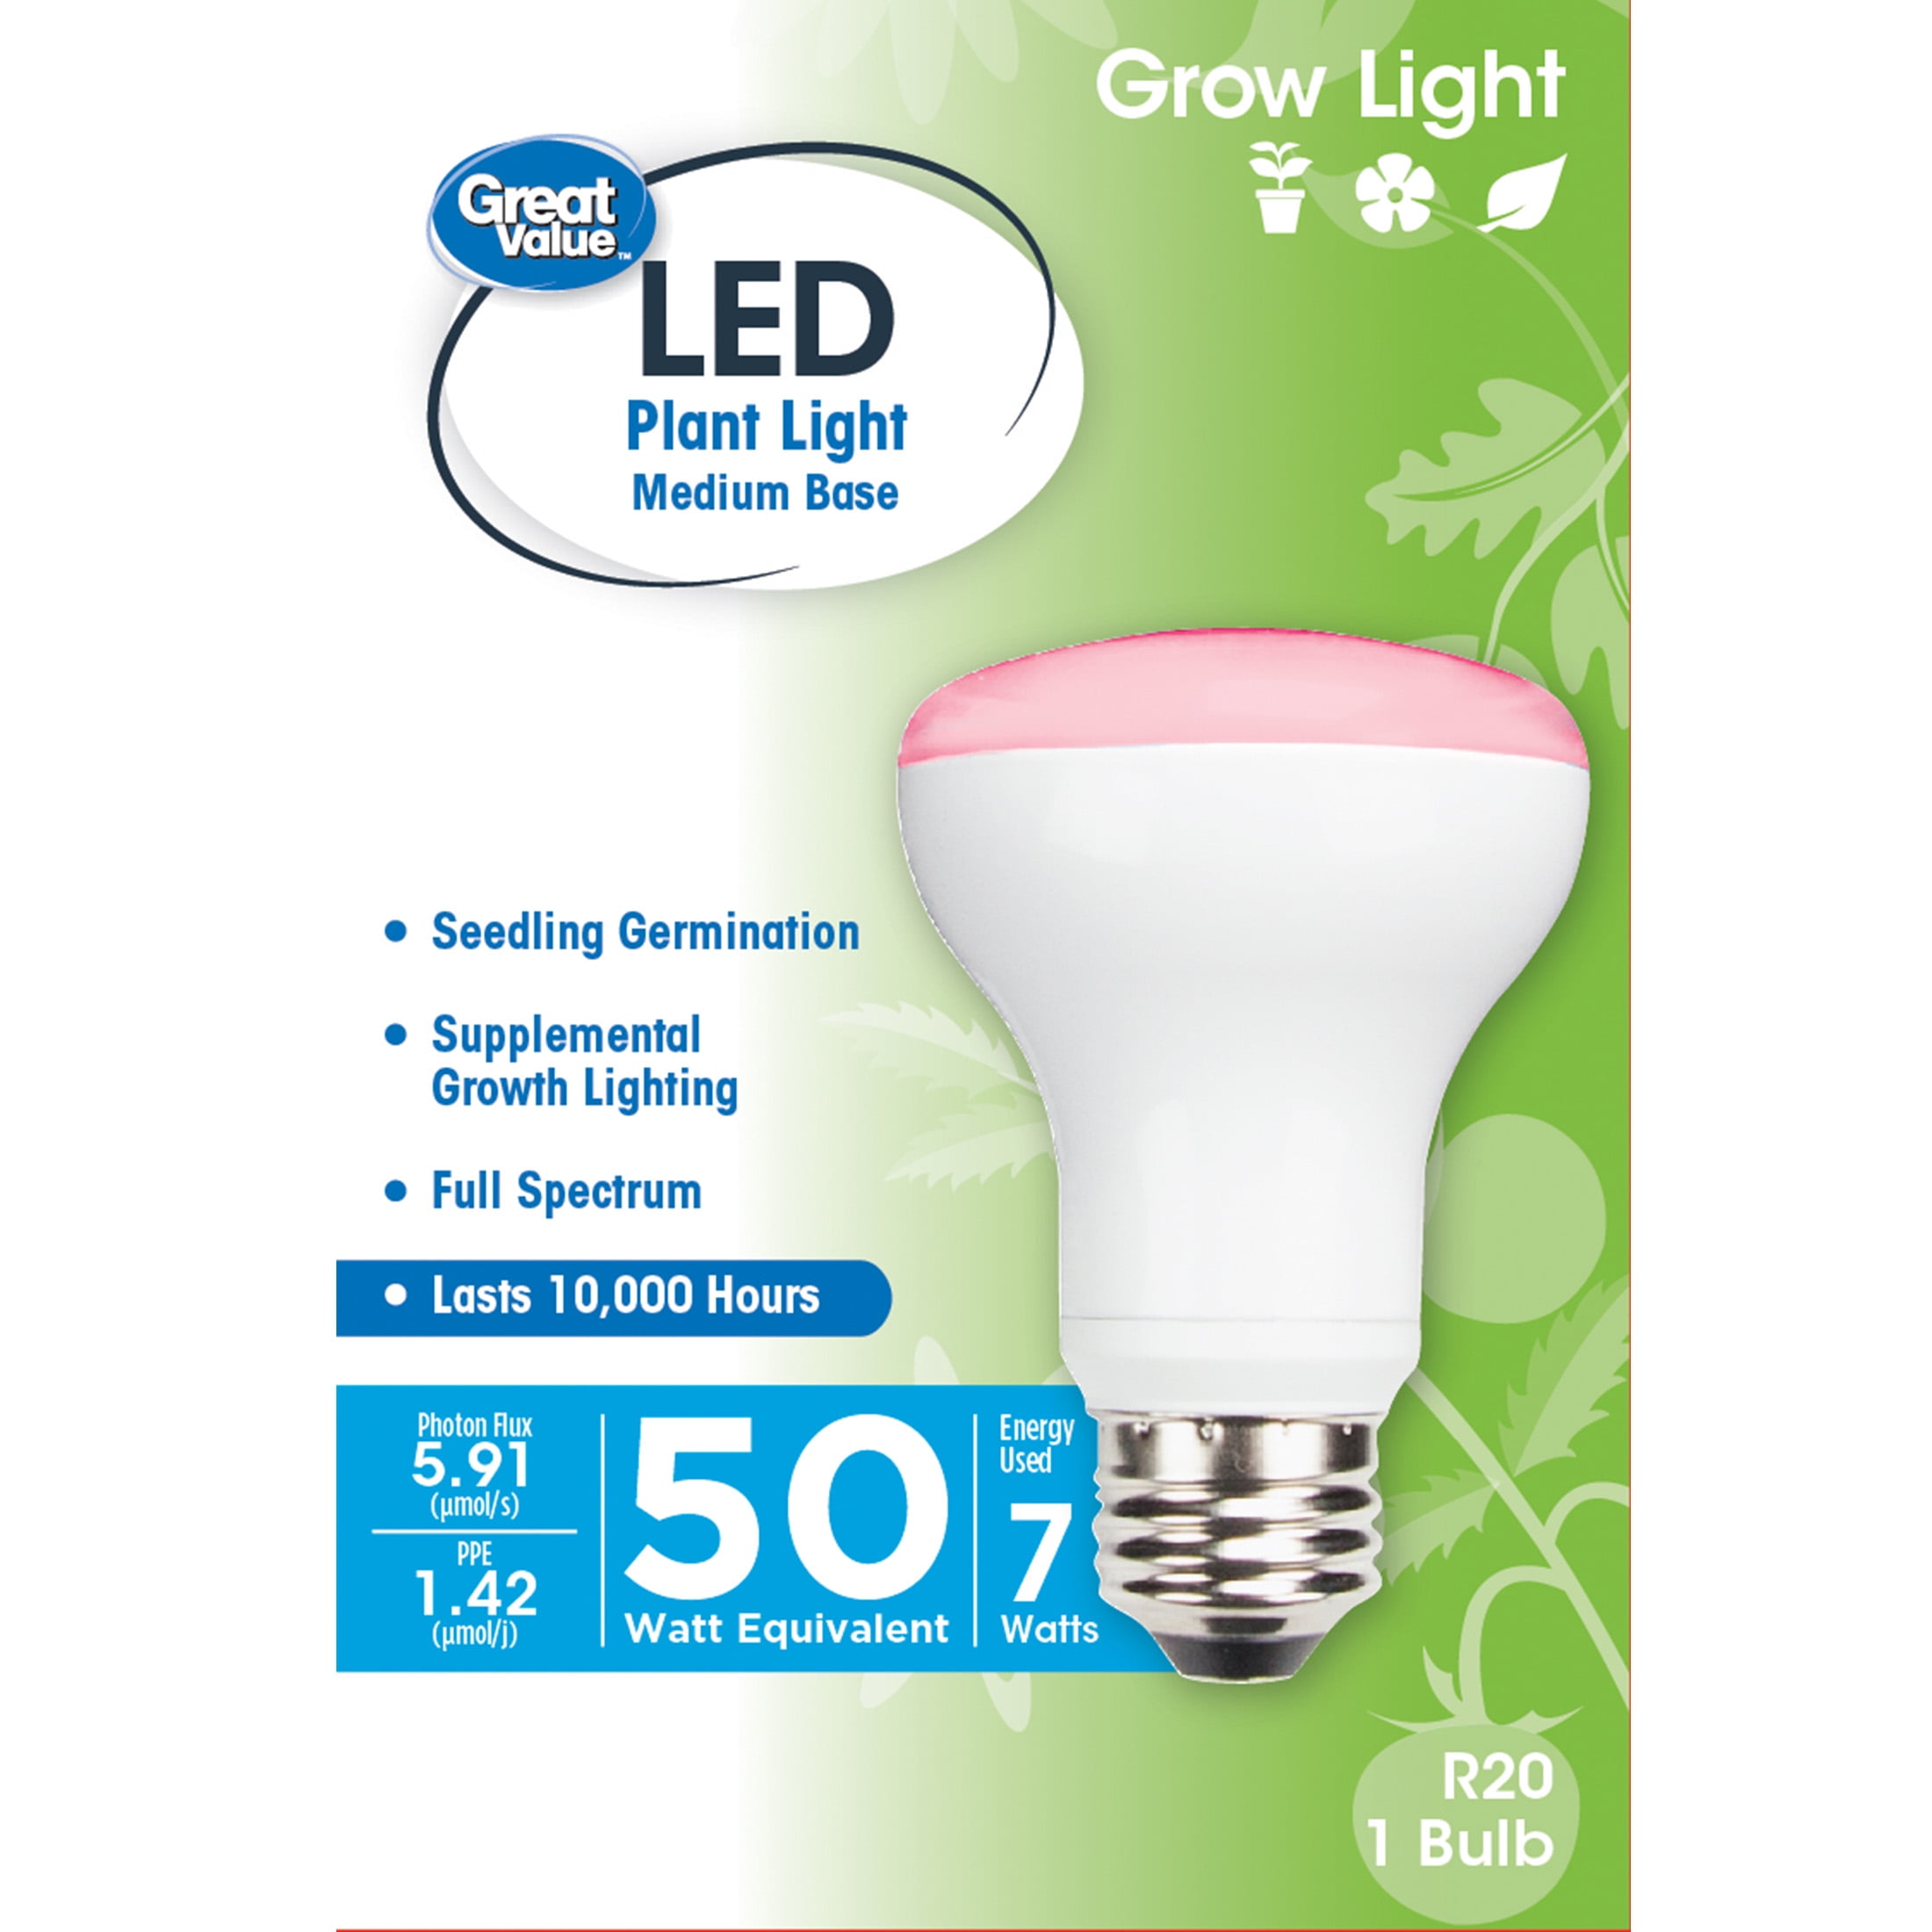 Great Value LED, 7Watts (50W Equivalent) Grow Light E26 Medium Base, Non-Dimmable, Plant, 1-Pack - Walmart.com